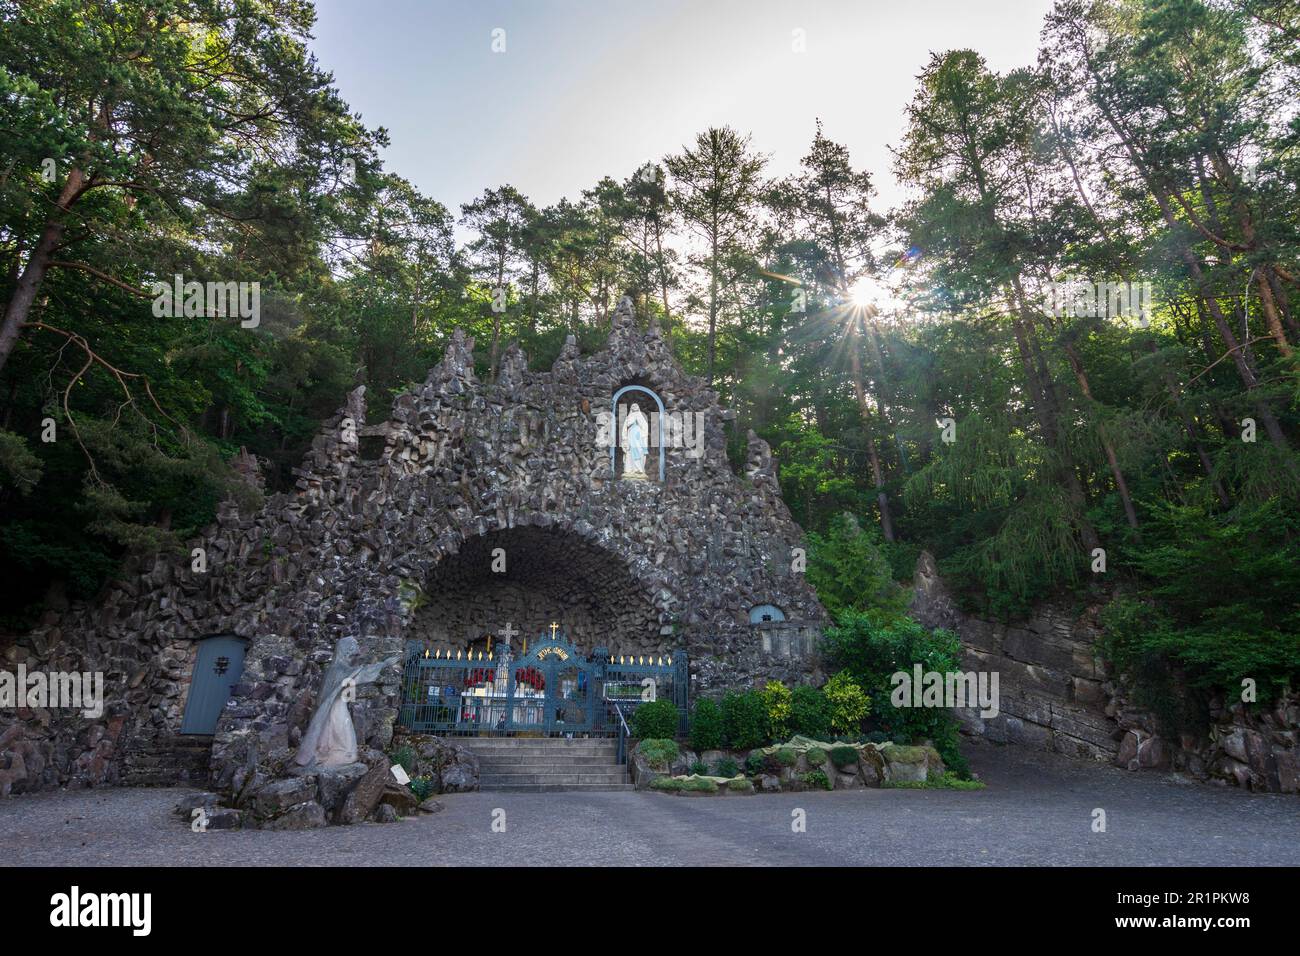 Bad Salzschlirf, Mariengrotte (Mary's grotto) in Vogelsberg, Hesse, Germany Stock Photo